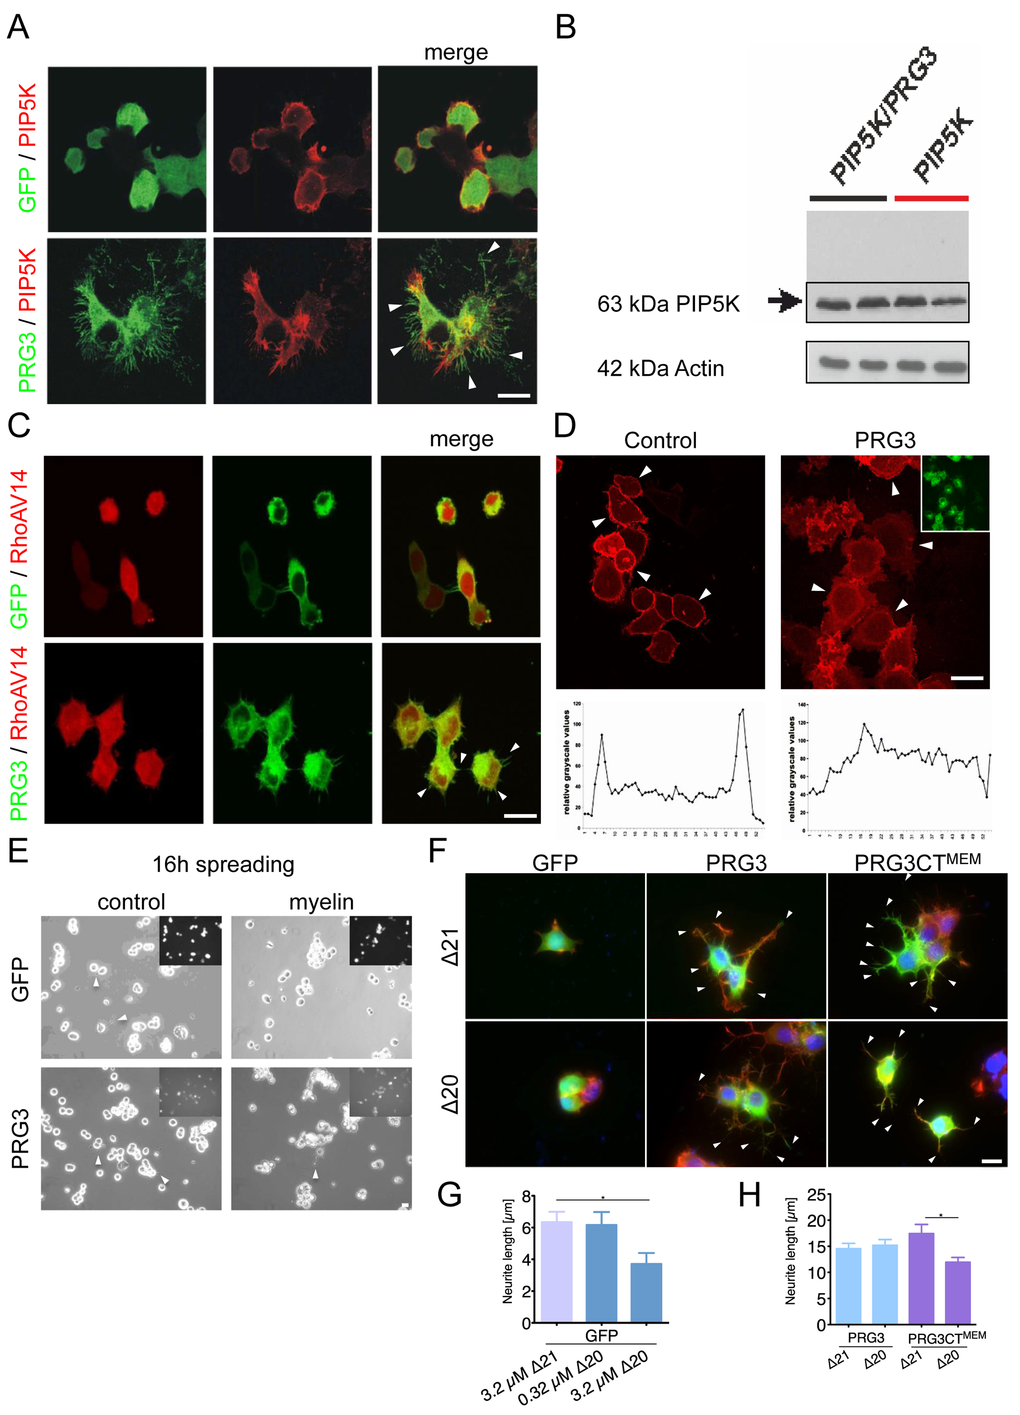 PRG3 impedes myelin and RhoA-induced axon collapse and translocates PIP2 from the plasma membrane. (A) Representative images of neurons expressing GFP and PIP5K (control) or PRG3 and PIP5K (PRG3). PRG3-expressing neurons still retain their complex morphology in the presence of PIP5K overexpression (arrows). Scale bar represents 20 µm. (B) Immunoblot for PIP5K expression in PRG3 expressing neurons. Bottom, Actin serves as a house keeping protein for equal gel loading. (C) Representative images of co-overexpression of RFP and PRG3 in the presence of dominant active RhoAV14. Note the increased filopodia in PRG3 expressing neurons (arrows). Scale bar represents 20 µm. (D) Disruption of phosphoinositol-(4,5)-bisphosphate (PIP2) in PRG3 expressing neurons. Representative pictures of GFP (control) and PRG3 overexpressing (PRG3) neurons expressing the RFP – PLC1 PH domain fusion constructs (red) as an in vivo probe for intracellular PIP2 localization. Transfection efficacy is given in the upper right corner. Bottom, representative trans-cellular pixel traces of PIP2 values in GFP (control) and PRG3 overexpressing (PRG3) neurons. In PRG3 cells PIP2 membrane dislocation could be observed (arrows). Scale bar represents 20 µm. (E) Axon spreading assay on myelin-coated substrates. Representative images of a spreading assay with GFP and PRG3 overexpressing neurons on control substrate and myelin substrate. Note that PRG3 expressing neurons form neurites after 16 hours on myelin. (F) Representative images of control (GFP), PRG3 and PRG3CTMEM cells treated with 3.2 µM Delta 20 (Δ20, bioactive neuronal contraction domain of Nogo-A). Neuronal collapse was detected in controls and PRG3CTMEM expressing cells compared to treatment with Δ21 (control peptide sequence of Nogo-A without collapse activity). (G) Quantification of neurite length of GFP expressing neurons. Three independent experiments were carried out and differences were considered statistically significant with * pt-test). Values are given as mean ± SEM. (H) Quantification of neurite length of PRG3 and PRG3CTMEM expressing neurons. Δ20 had no effect on PRG3 overexpression neurons but significantly reduced neurite length of PRG3CTMEM. Three independent experiments were carried out and differences Differences were considered statistically significant with * pt-test). Values are given as mean ± SEM.